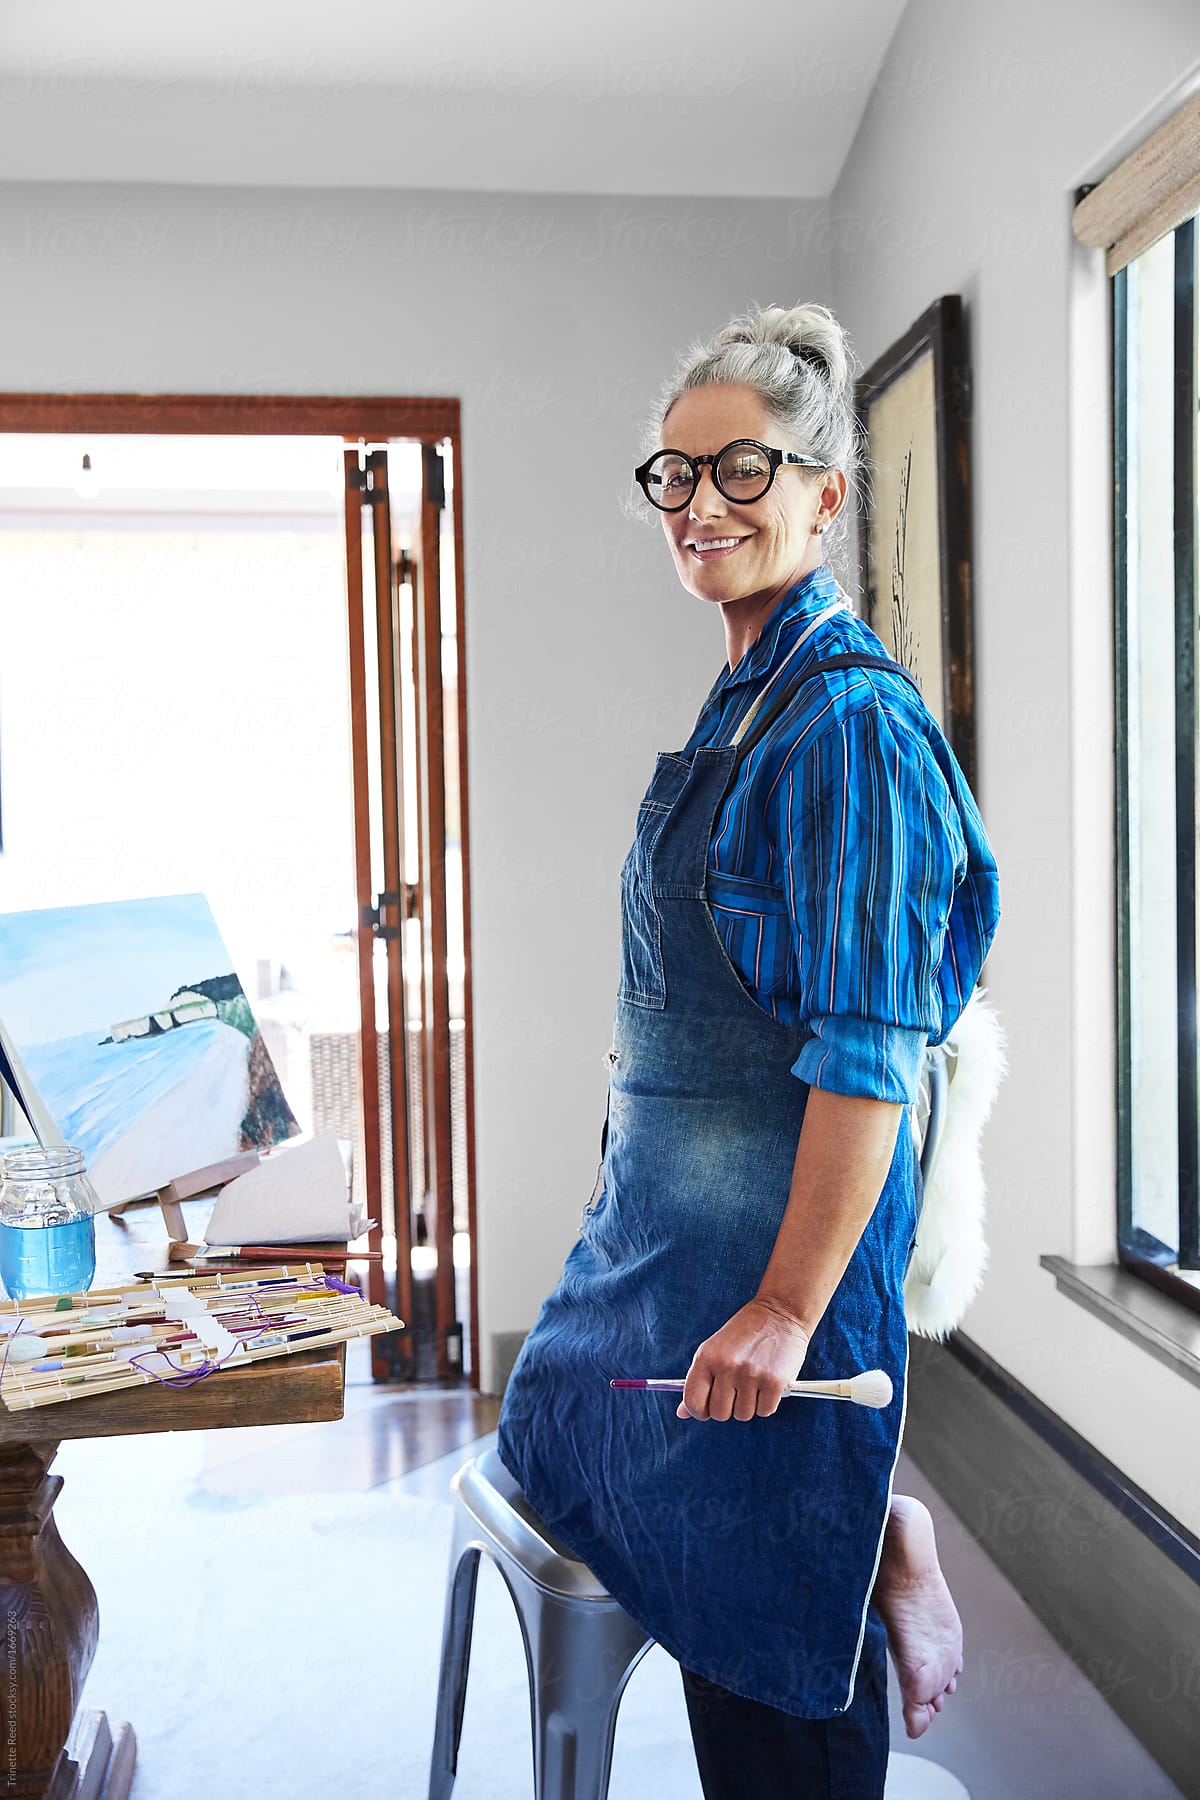 Artist Portrait Of Mature Woman With Grey Hair In Her Art Studio In